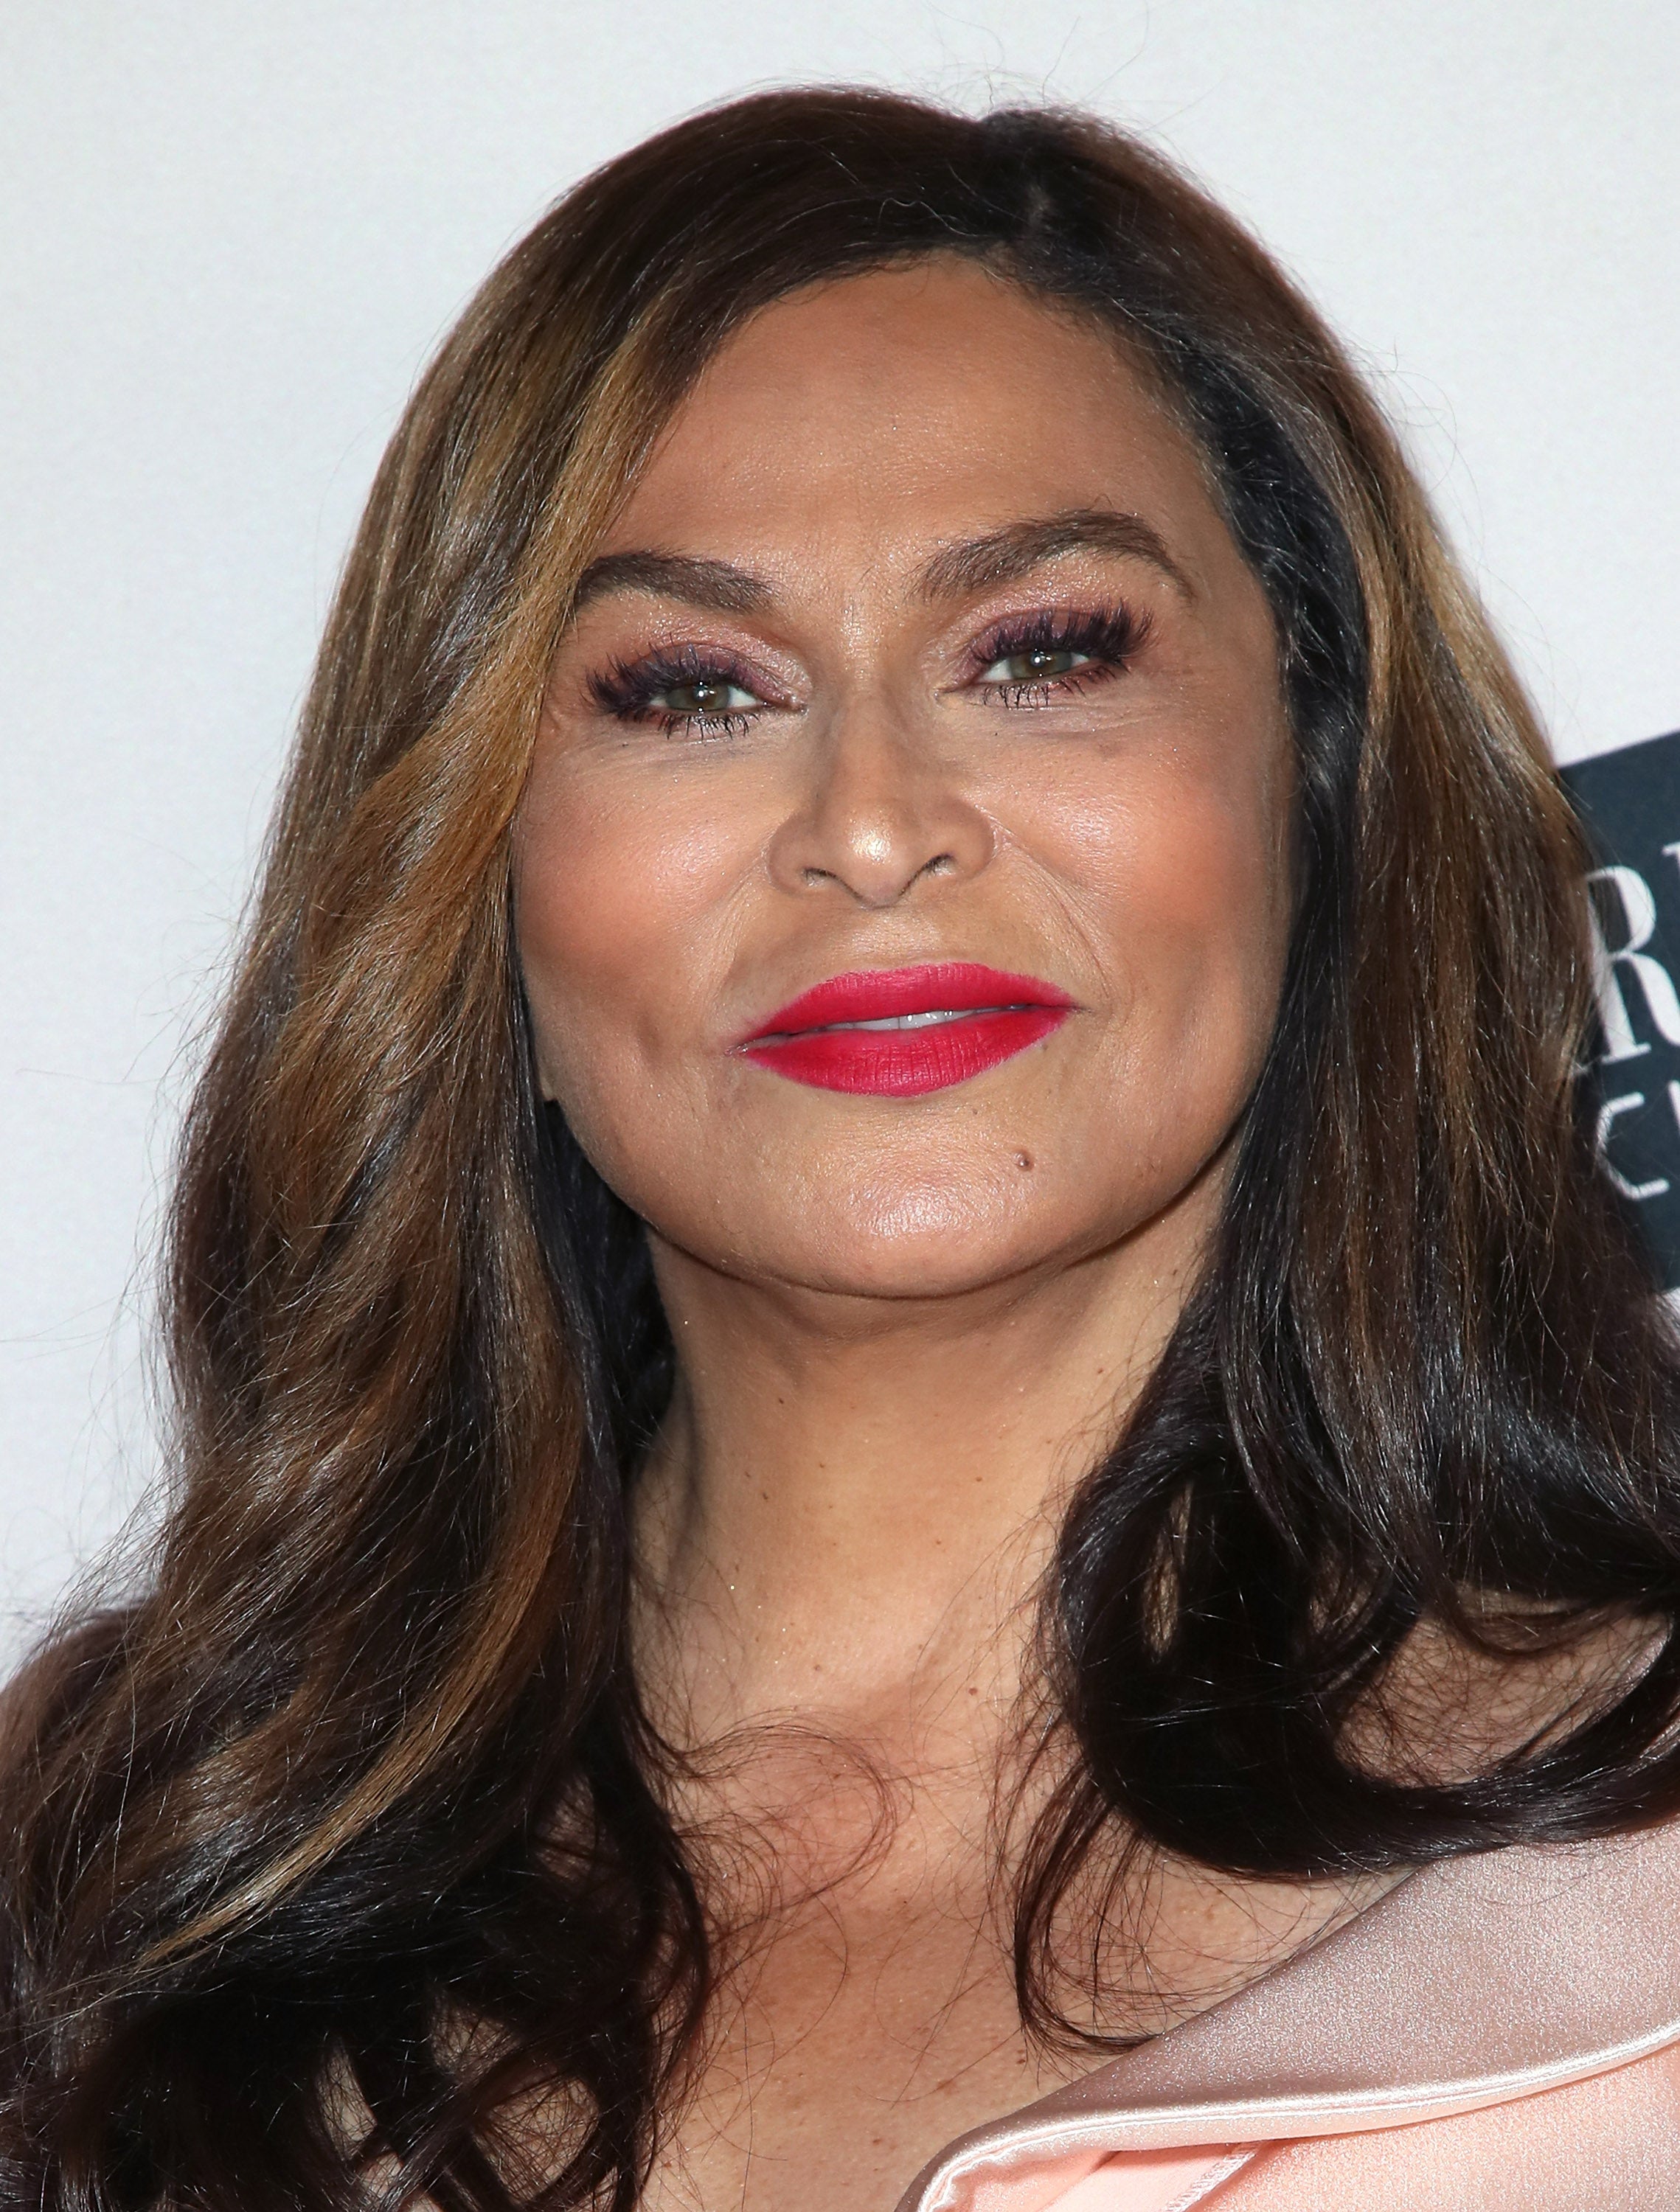 Glowing Grandma! Beyonce’s Mom Tina Is ‘Having a Ball’ in N.Y.C. After Twins’ Birth